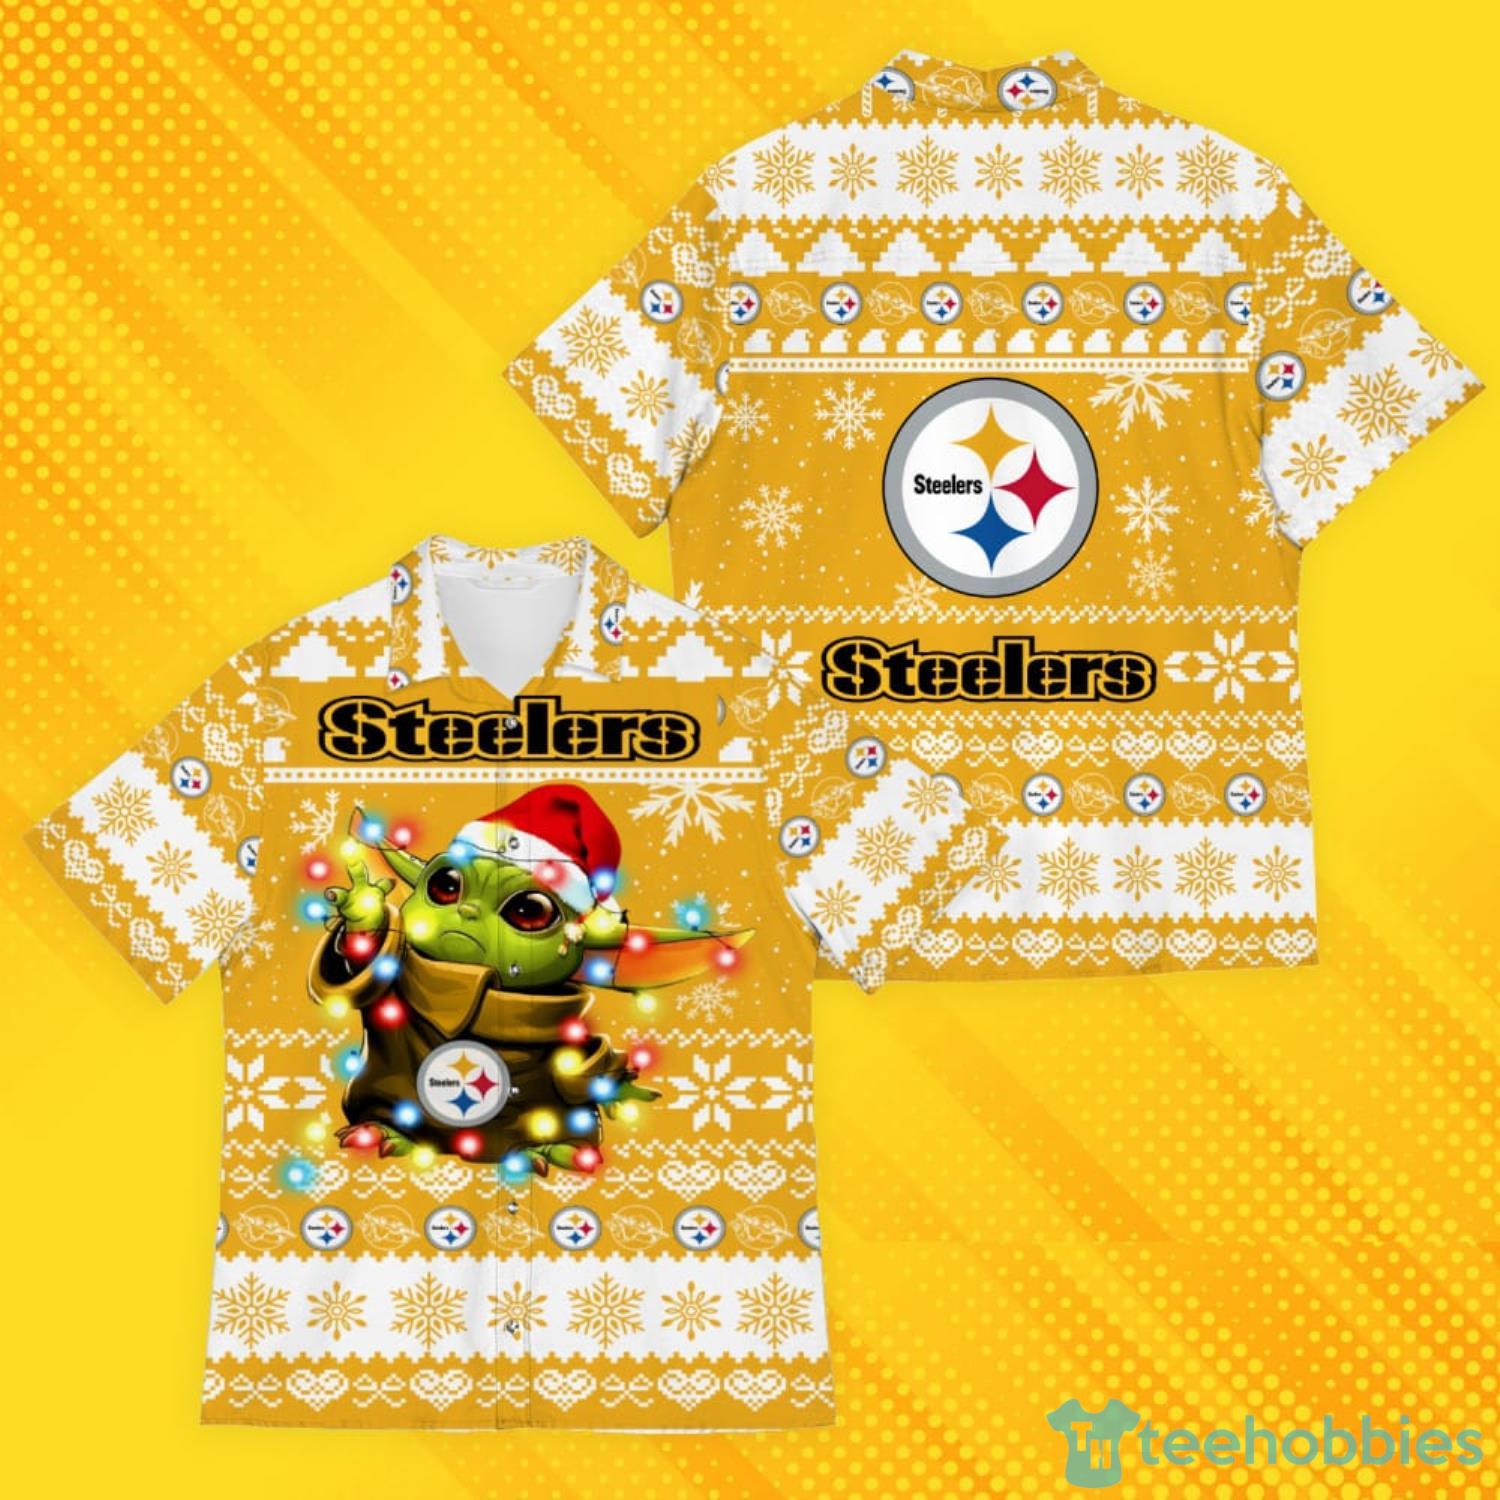 OwlOhh Memphis Grizzlies Baby Yoda Star Wars Sports Football American Ugly Christmas Sweater, Jumper New Trends for Fans Club Gifts Unise